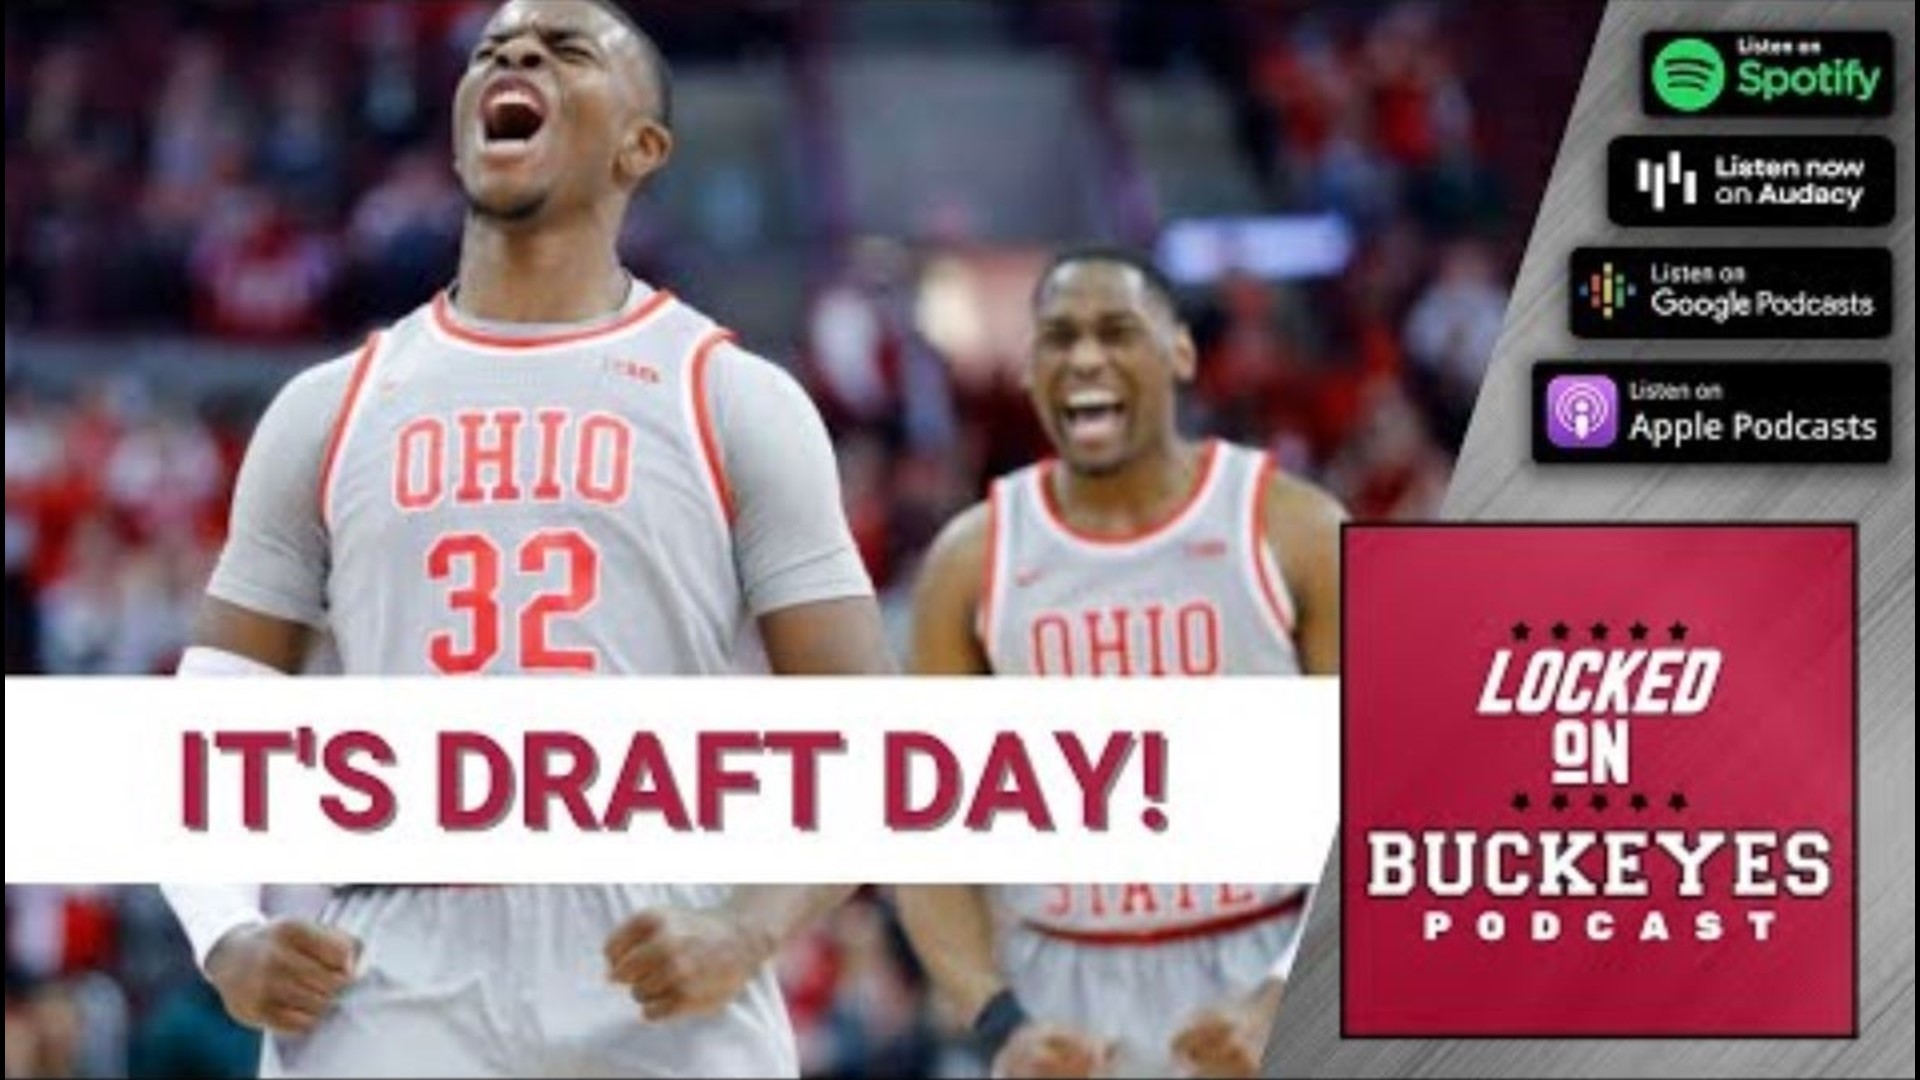 We discuss the NBA Draft and its impact involving players from Ohio State.